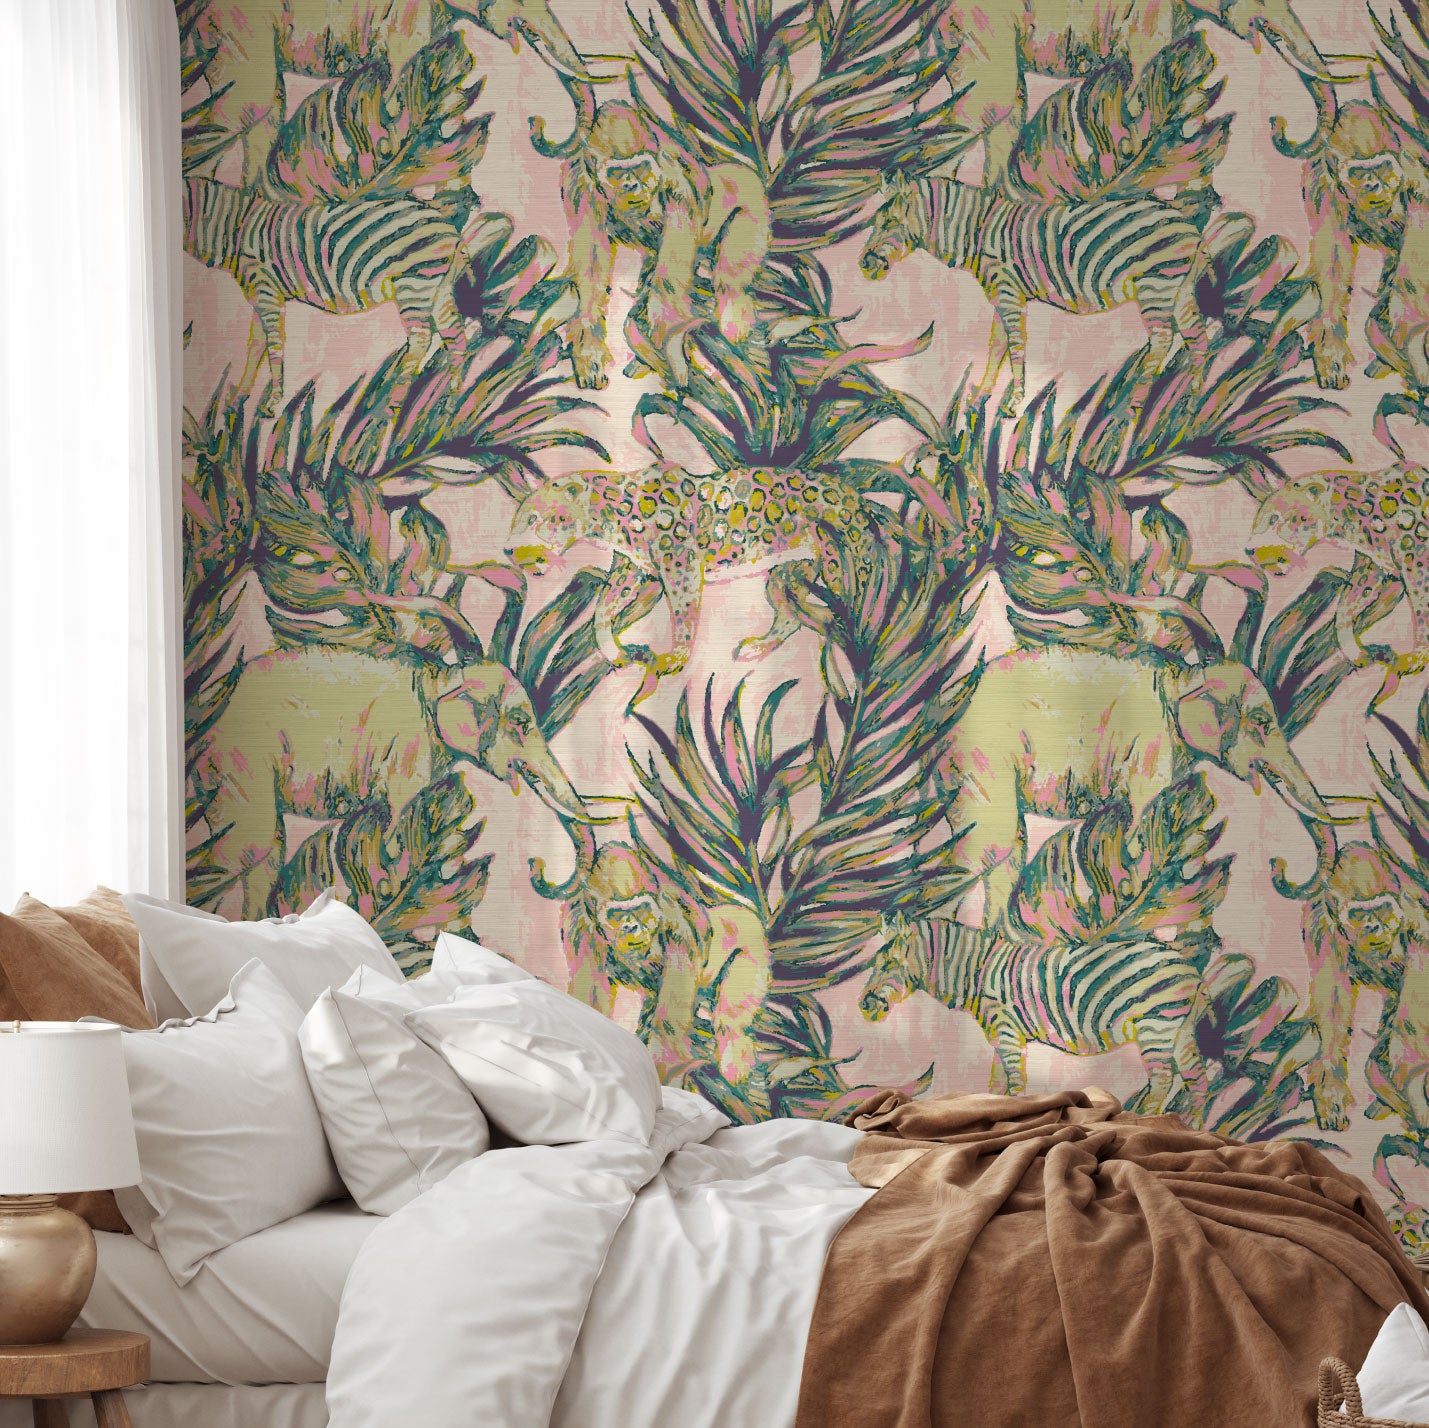 This Grasscloth Wallpaper print features elephants, gorillas, zebras and cheetahs prowling through palm leafs in this watercolor print. Print is on cream and pink base with shades of dark green and light green pistachio animal print with highlights of pastel neon pink